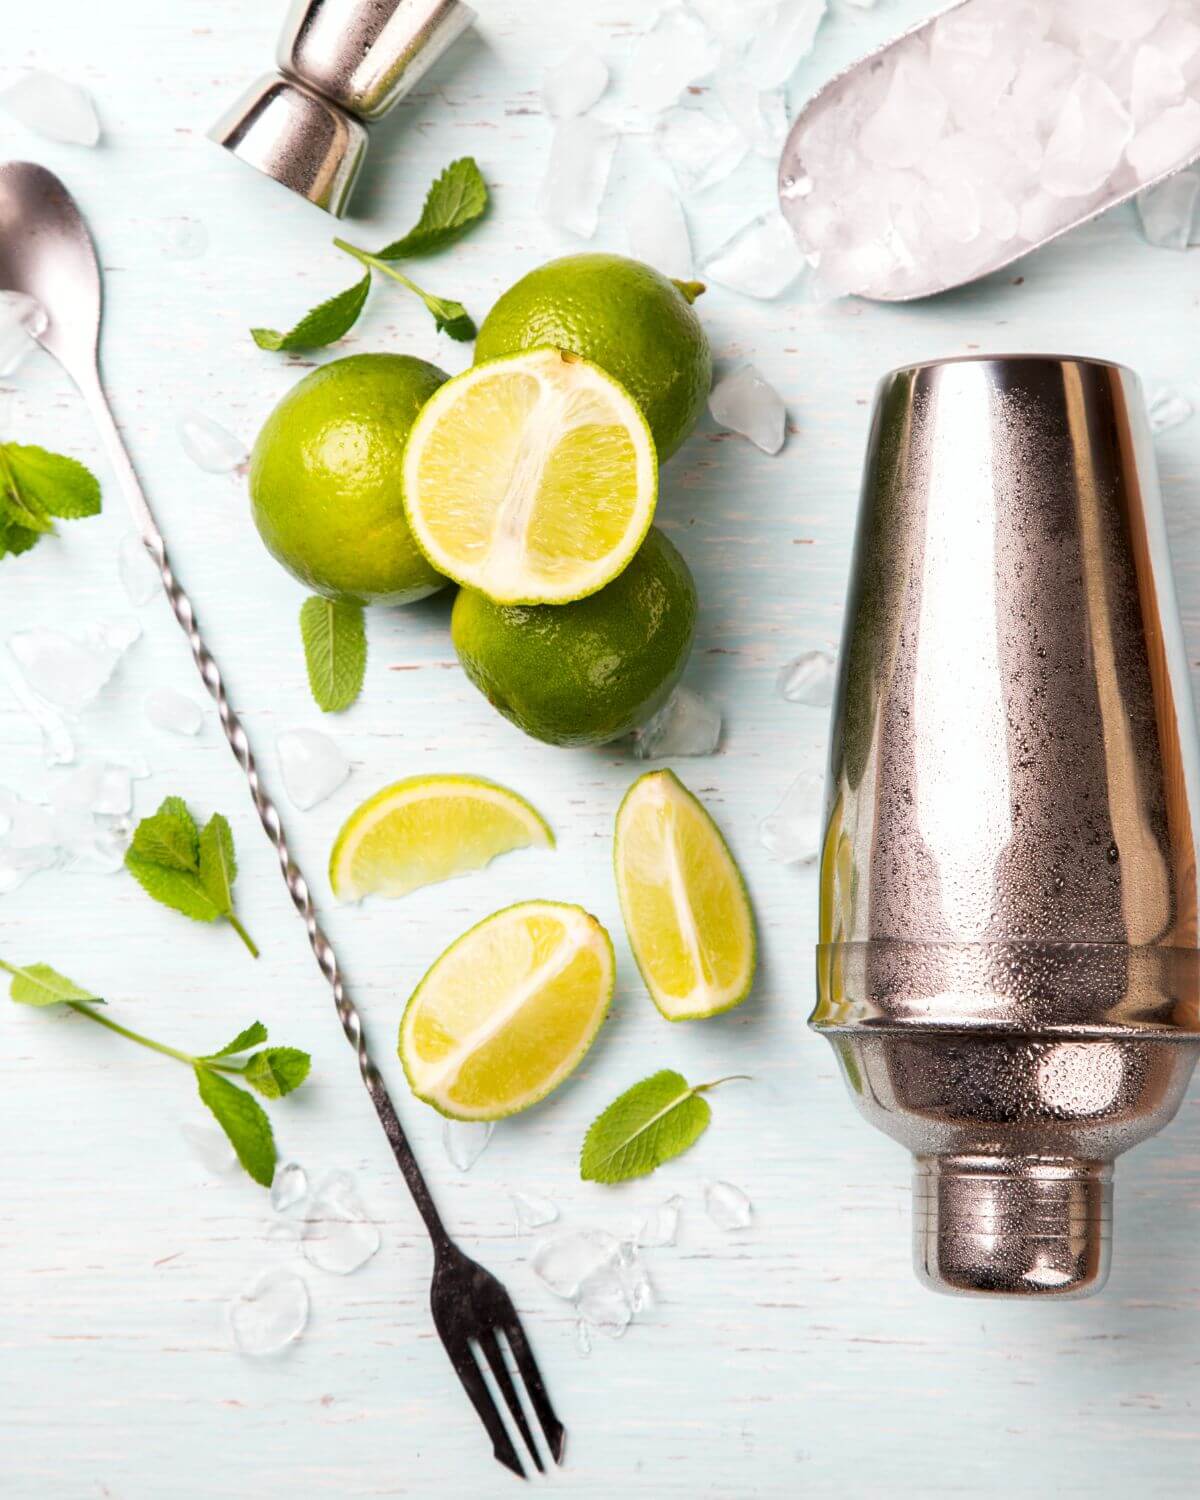 A shaker with lime for the bacardi cuban mojito.